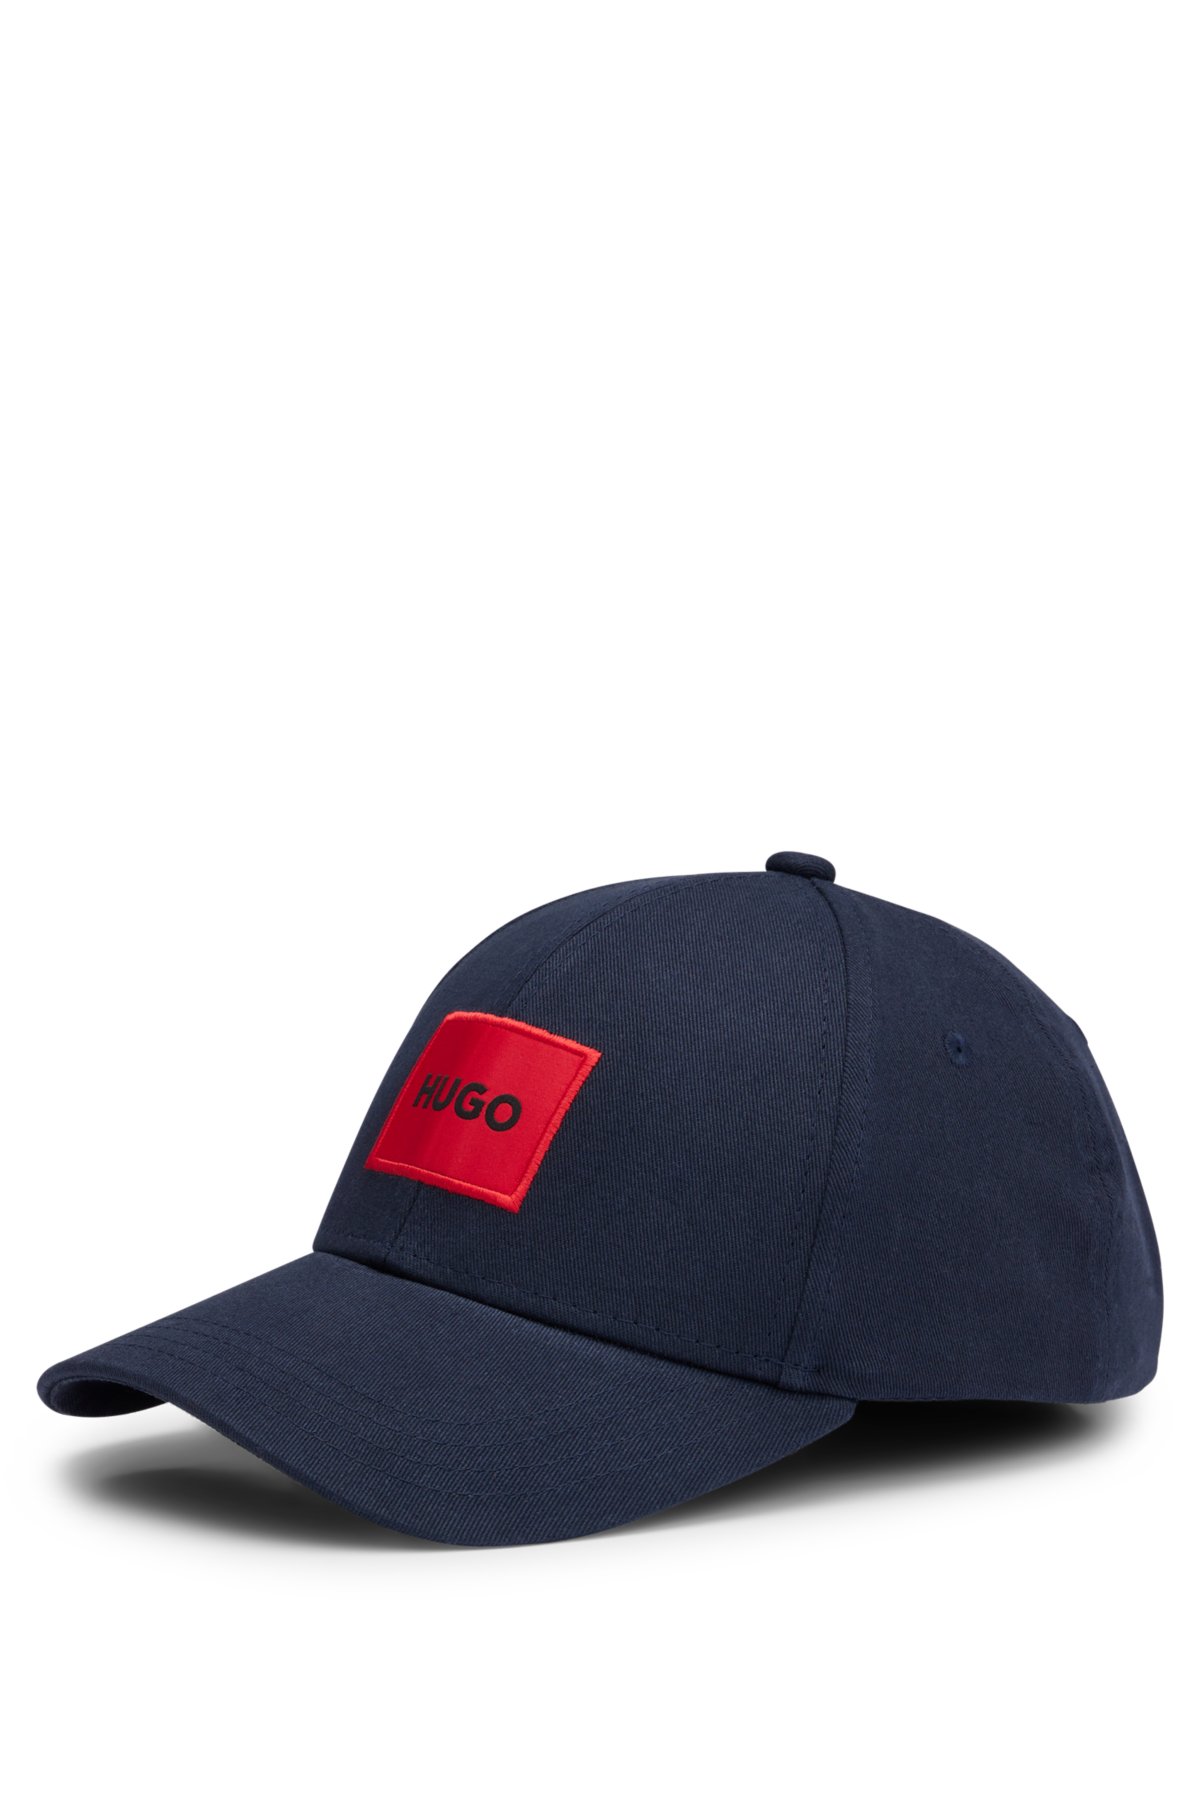 Cotton-twill label cap - with red HUGO logo